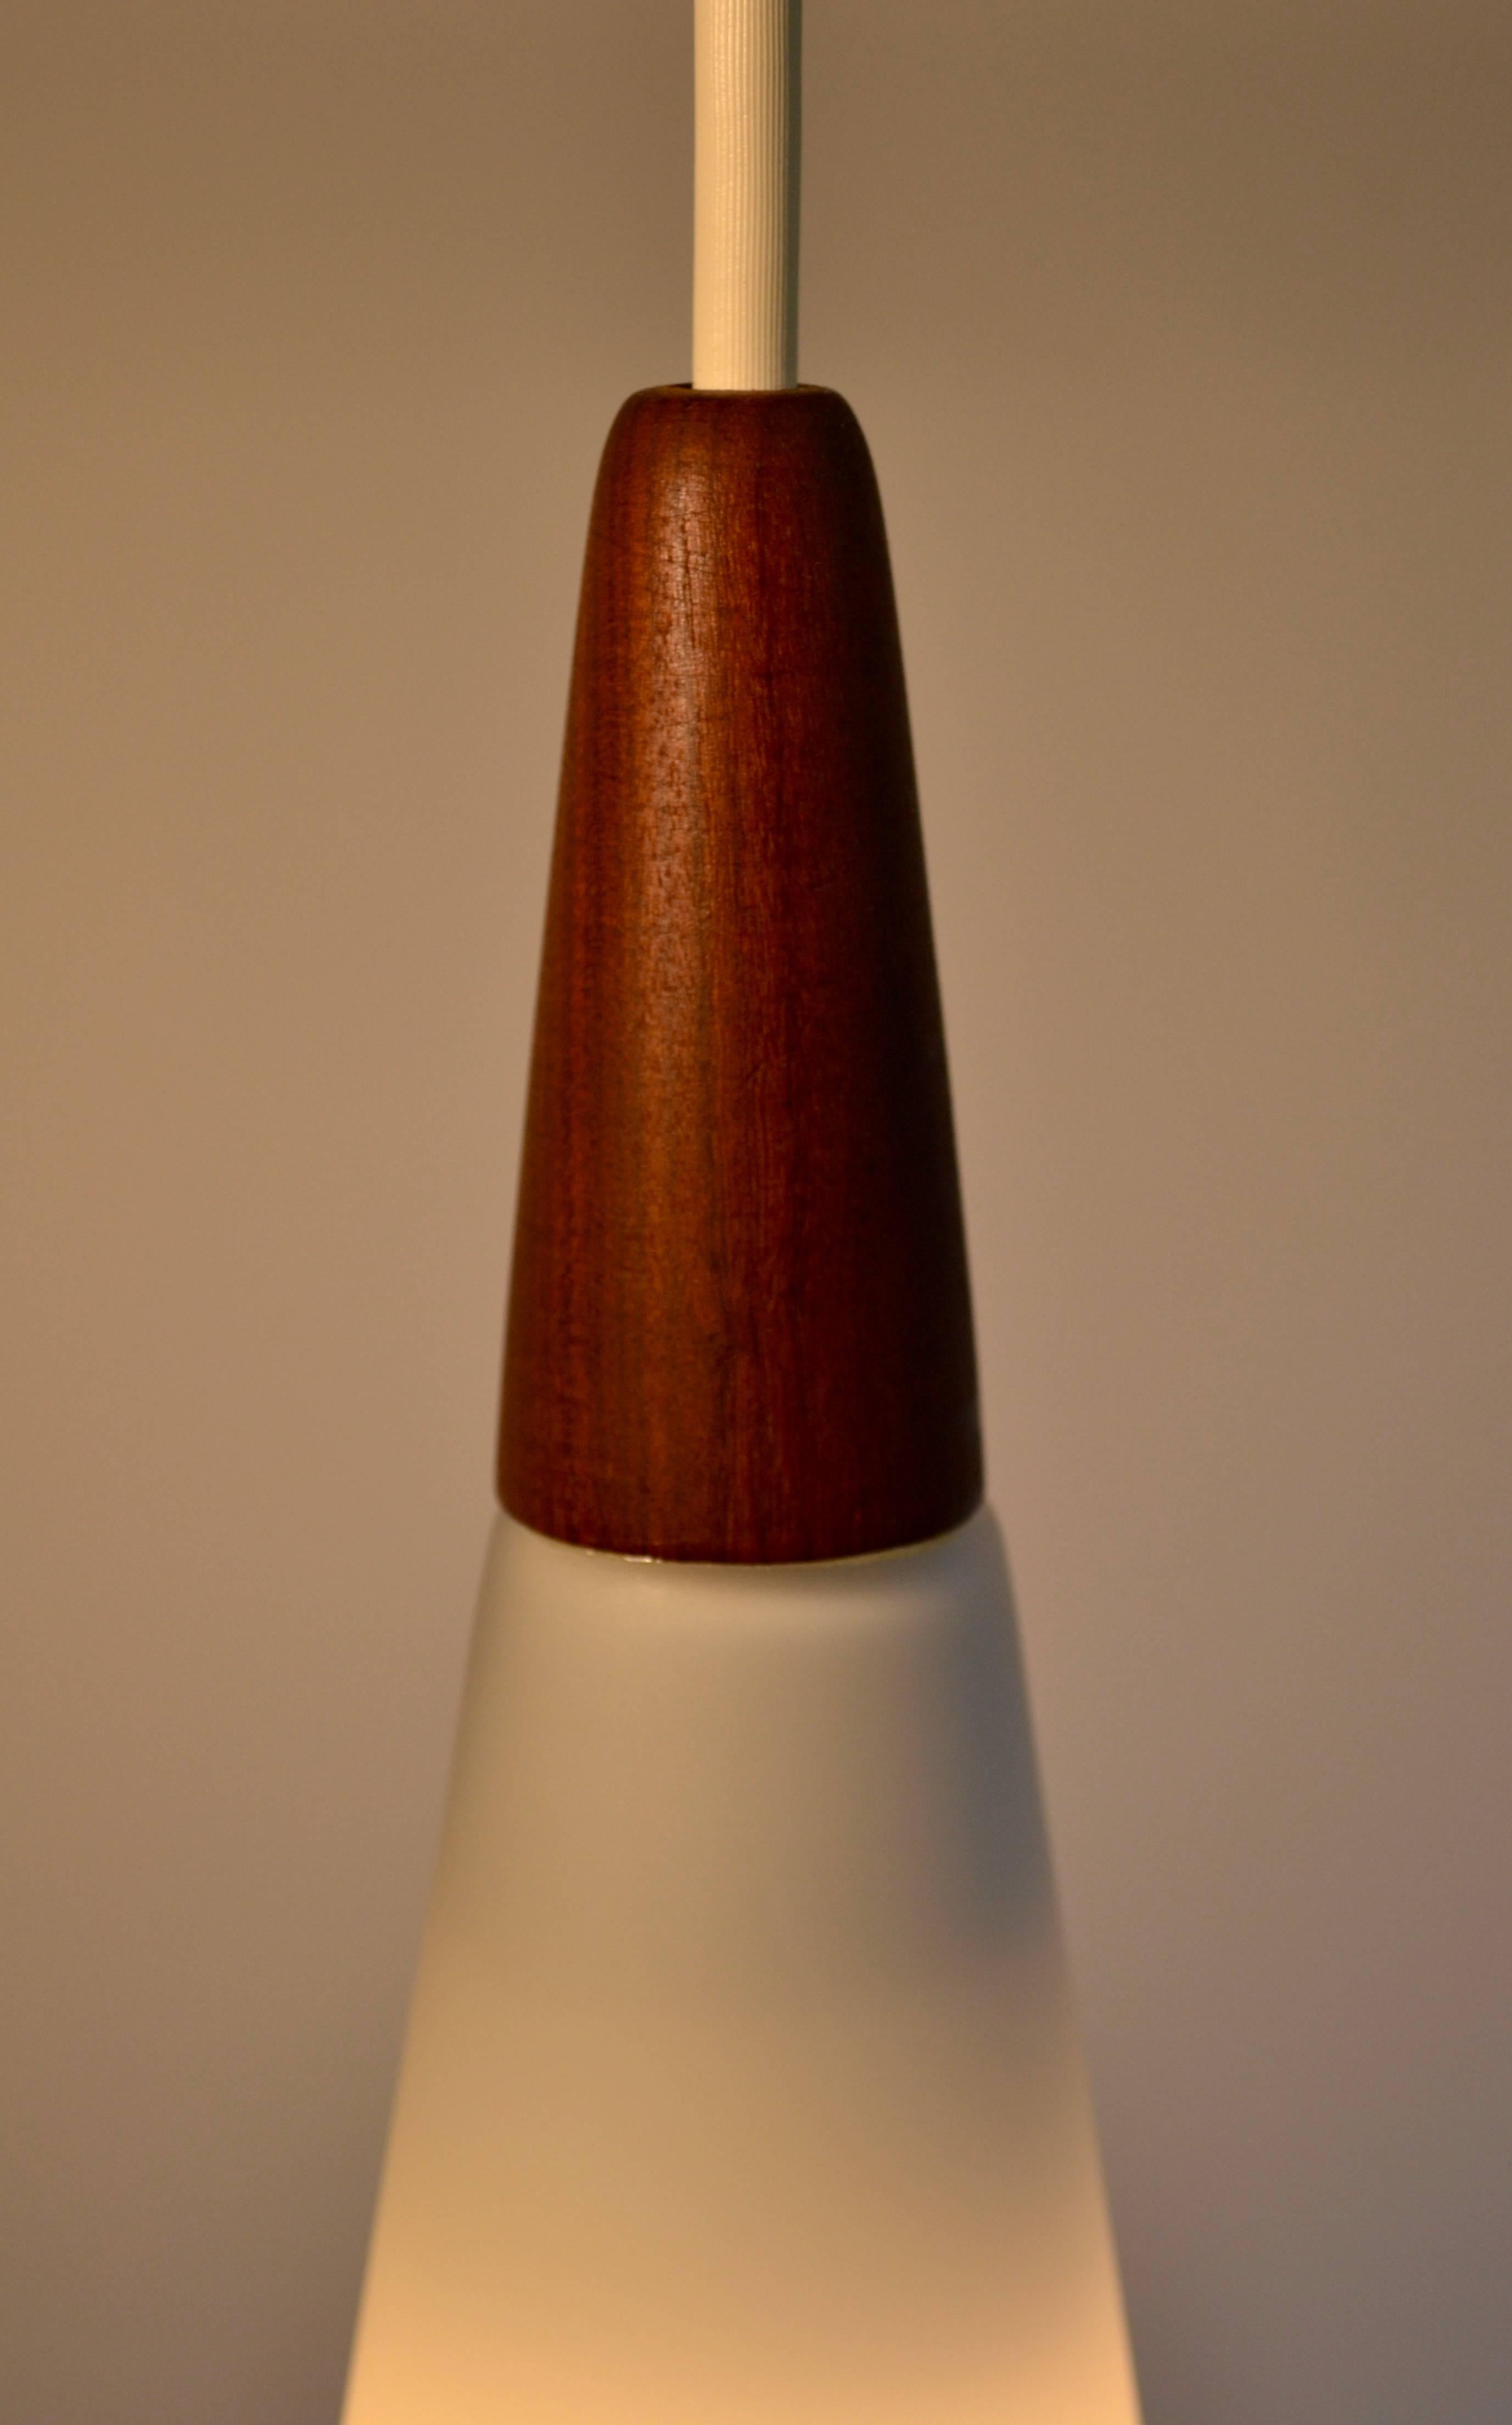 Mid-Century Modern white satin glass and teak cone shaped pendant lights made in Finland by Holmegaard, circa 1960. Nice large size. Excellent condition. Set of three. All original.